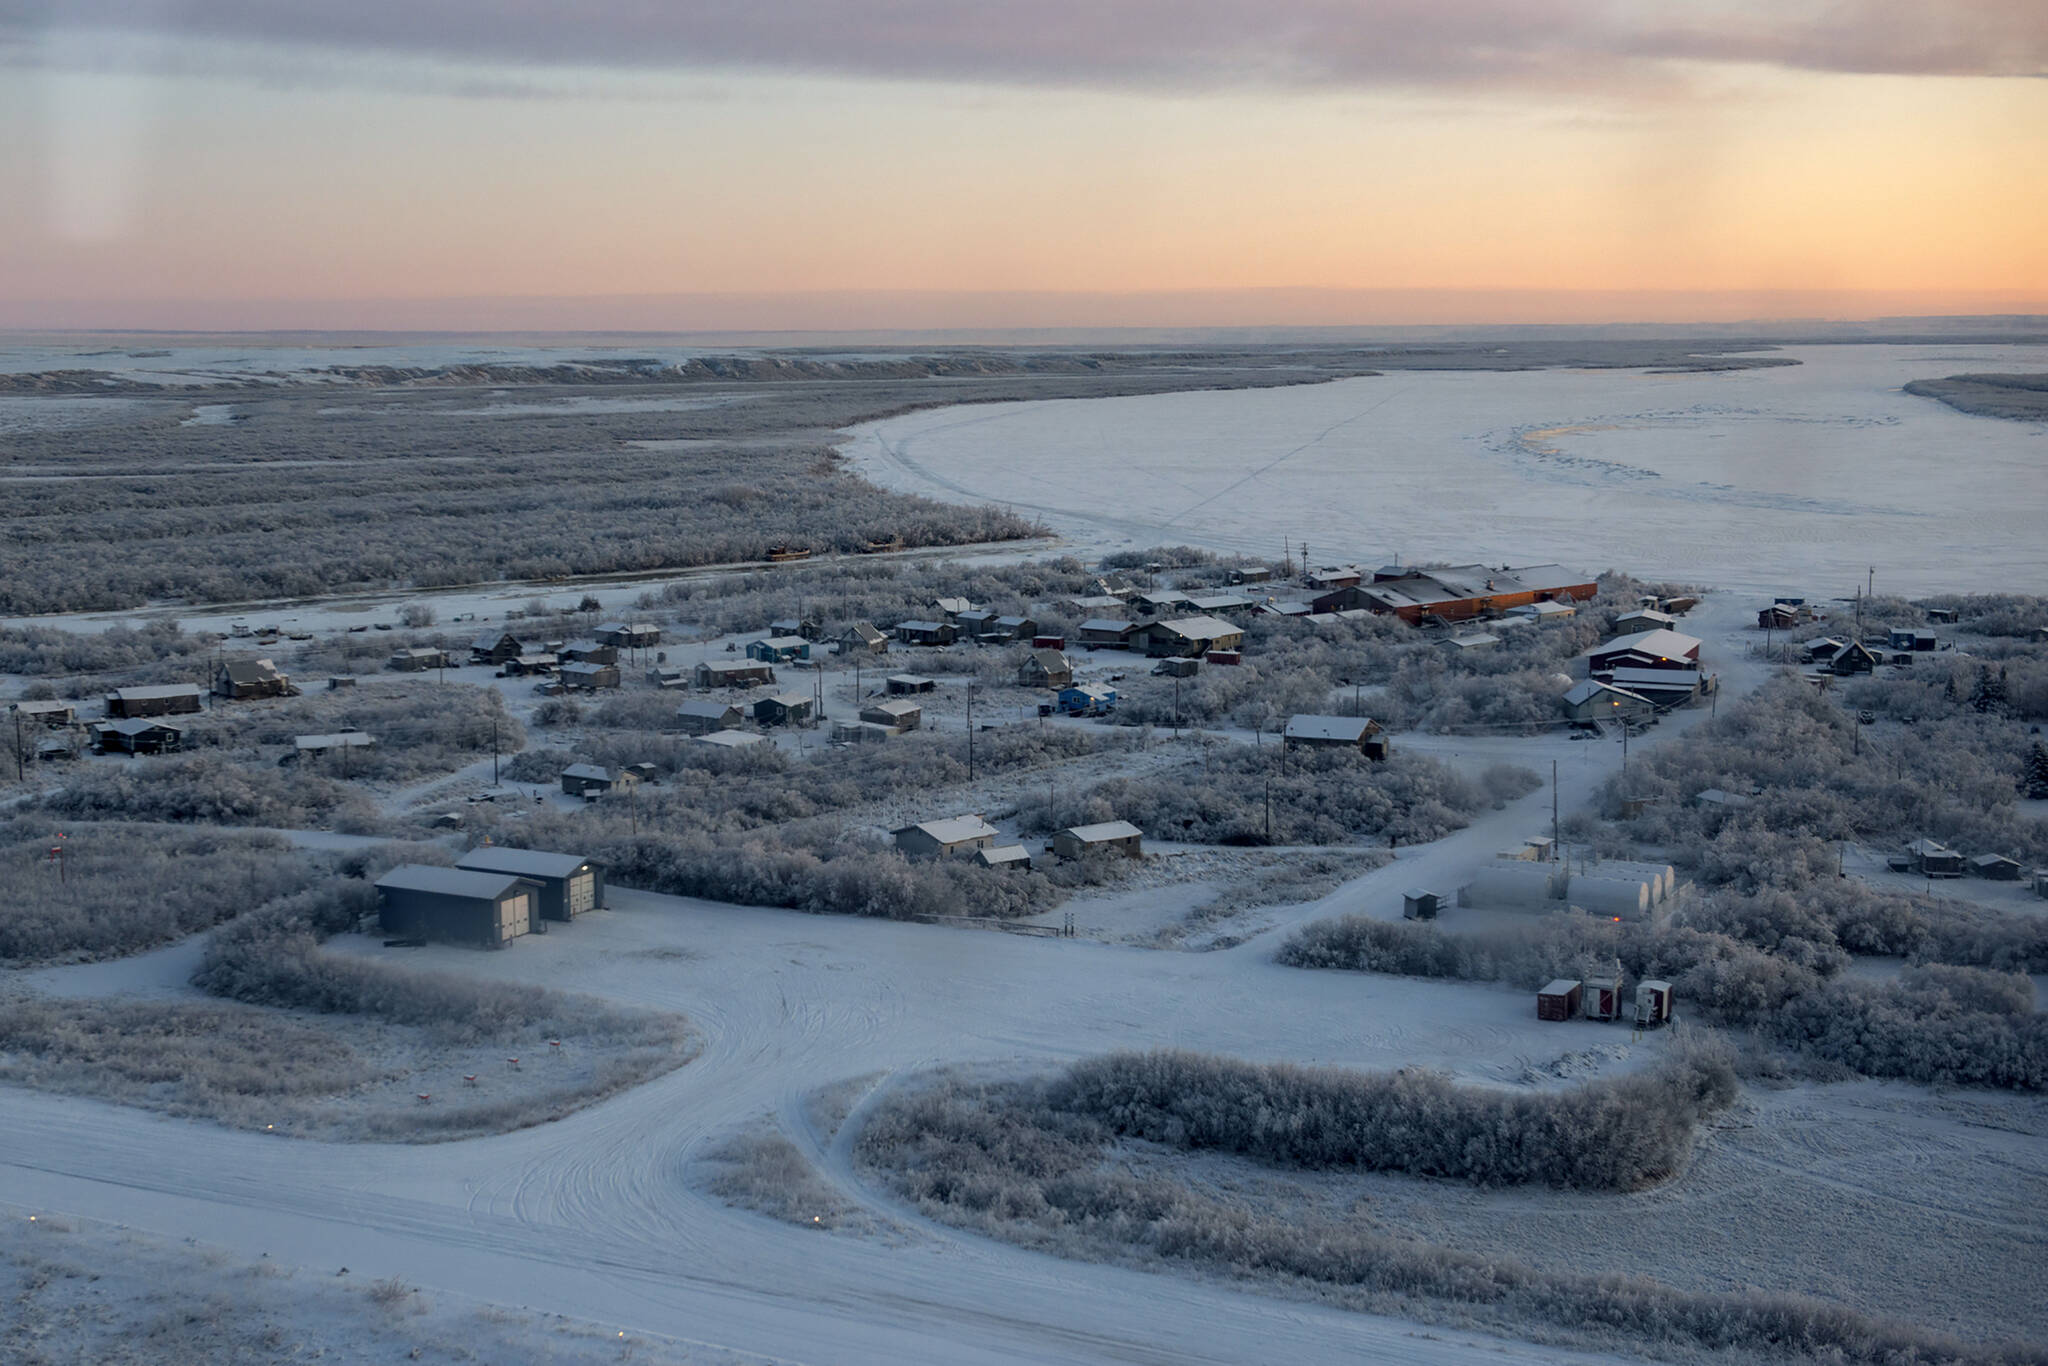 This photo provided by the U.S. Air Force/Alaska National Guard photo shows the William Miller Memorial School, larger structure top right, which is being severely eroded by the nearby Kuskokwim River in the village of Napakiak, Alaska, on Dec. 3, 2019. The school is just 64 feet (19.51 meters) from the Kuskokwim River, and it's getting closer every year. Just two years ago, the school was less than 200 feet (60.96 meters) from the river. Climate change is a contributing factor in the erosion caused by the Kuskokwim, a river that becomes an ice highway for travelers in the winter. (Airman 1st Class Emily Farnsworth, U.S. Air Force/ Alaska National Guard)